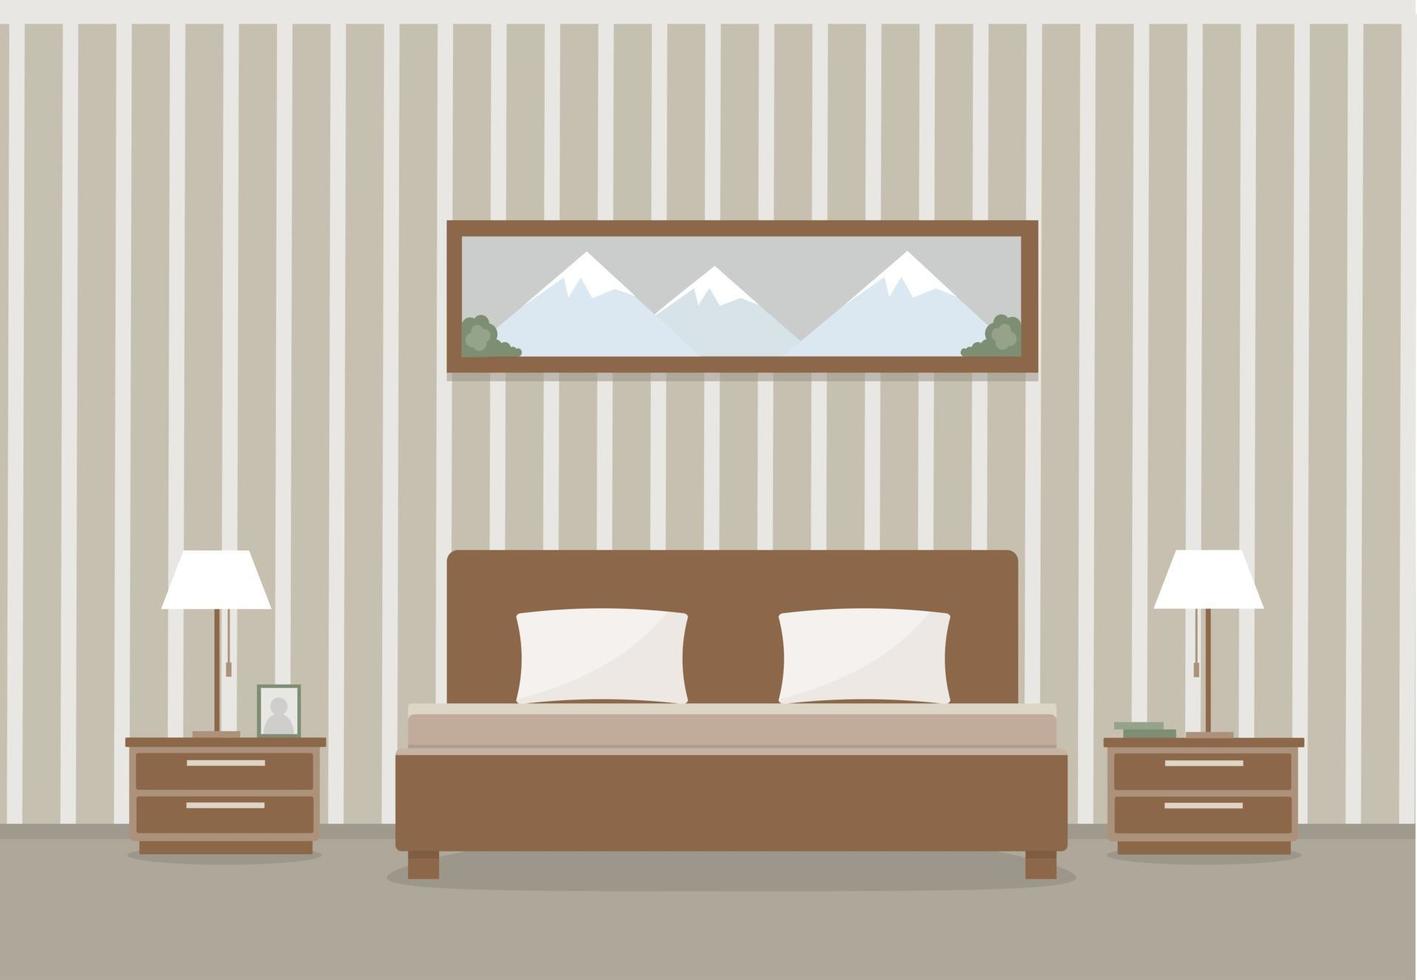 Light bedroom interior with double bed tables Flat style vector illustration design template